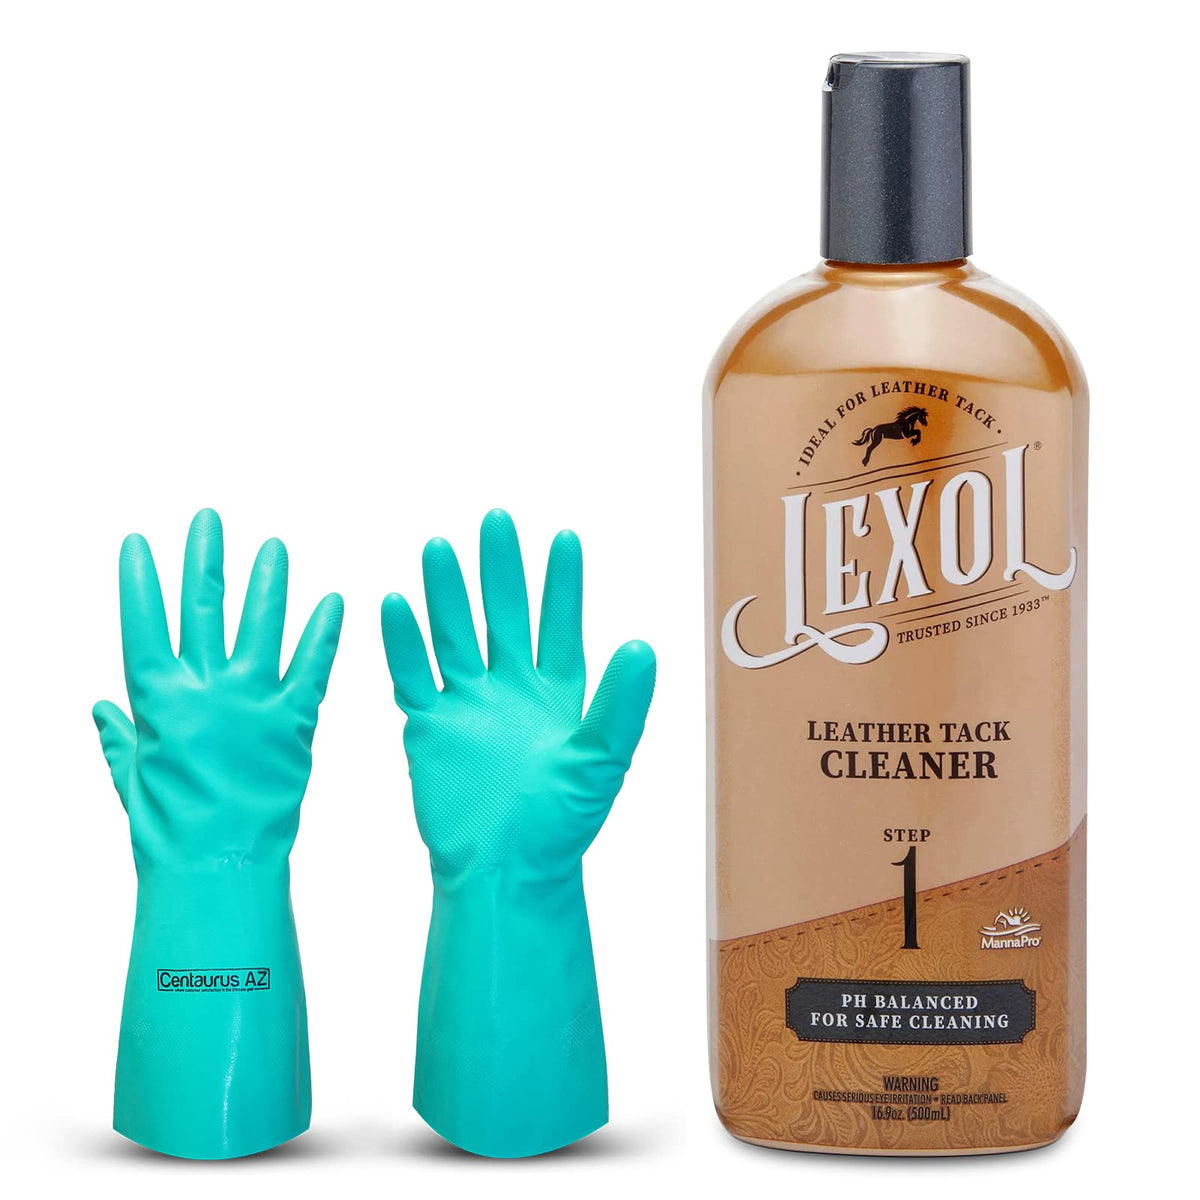 Lexol Leather Conditioner, Use on Car Leather, Furniture, Shoes